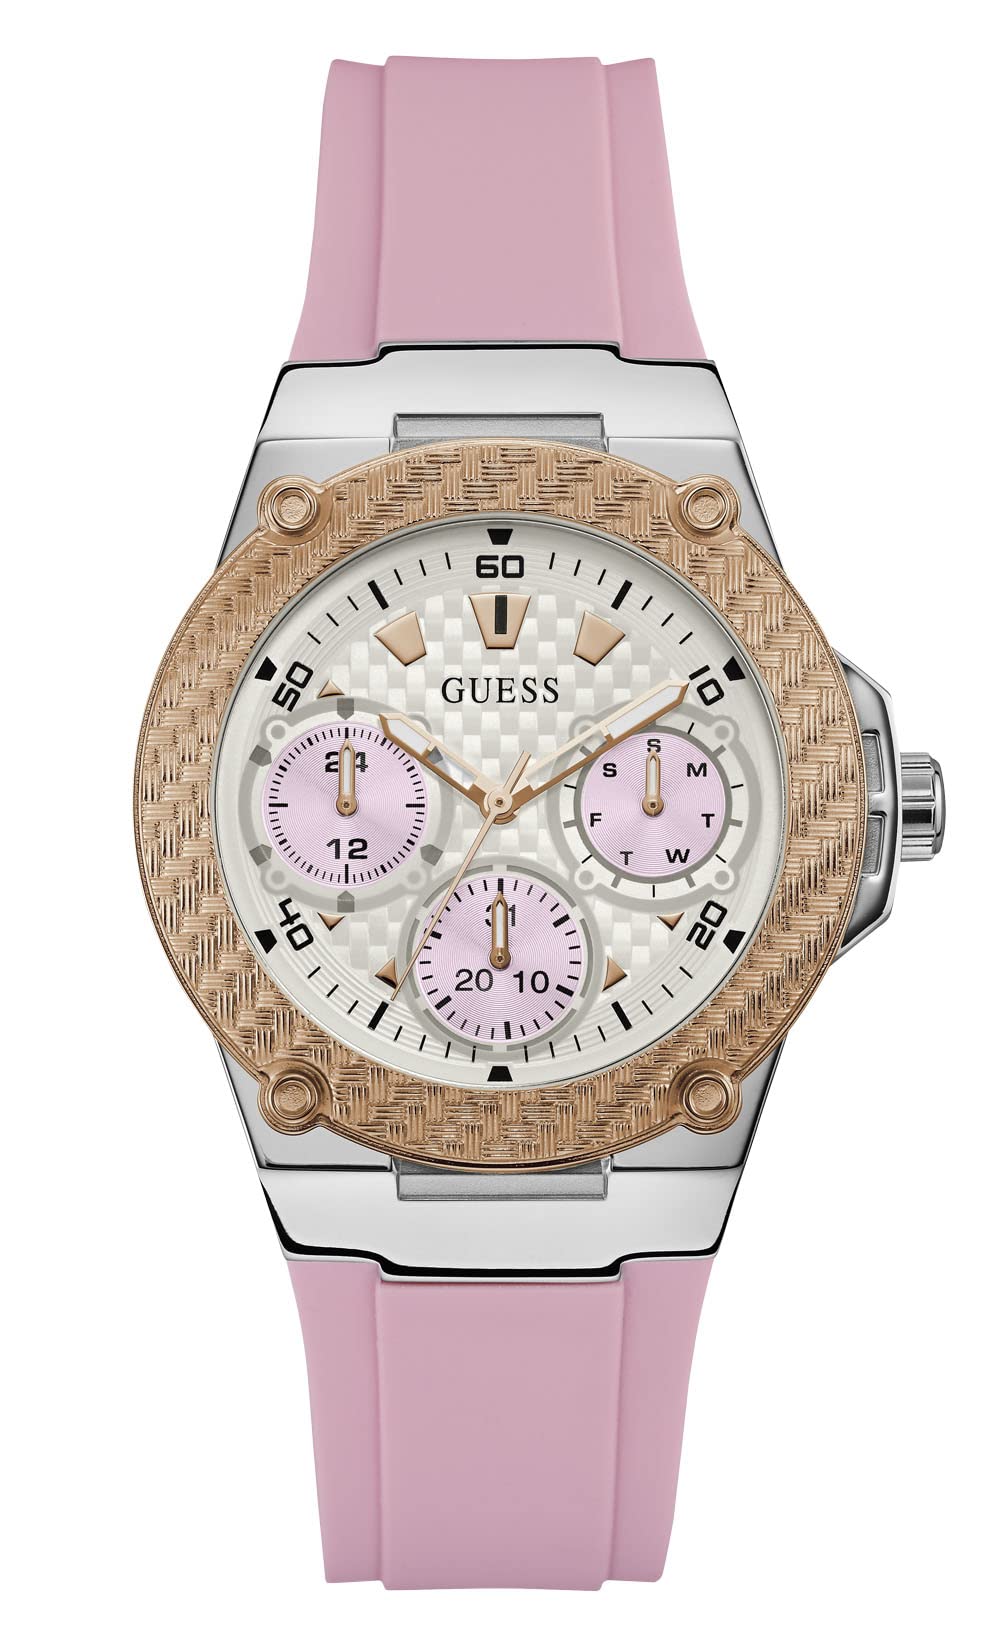 GUESS Women's Quartz Watch with Analog Display and Silicone Strap W1094L4